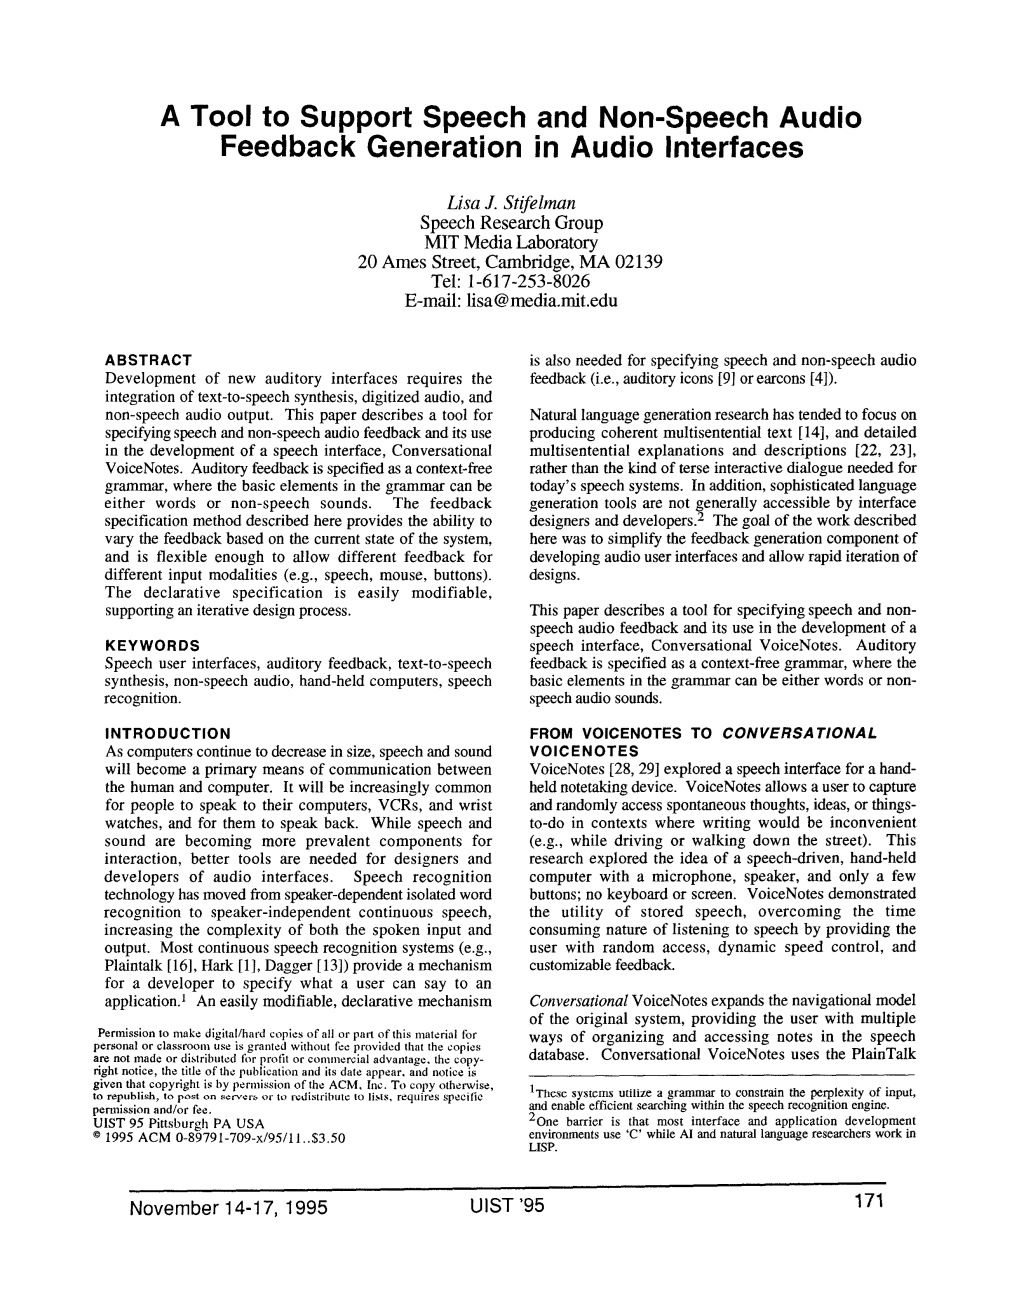 A Tooi to Support Speech and Non-Speech Audio Feedback Generation in Audio Interfaces